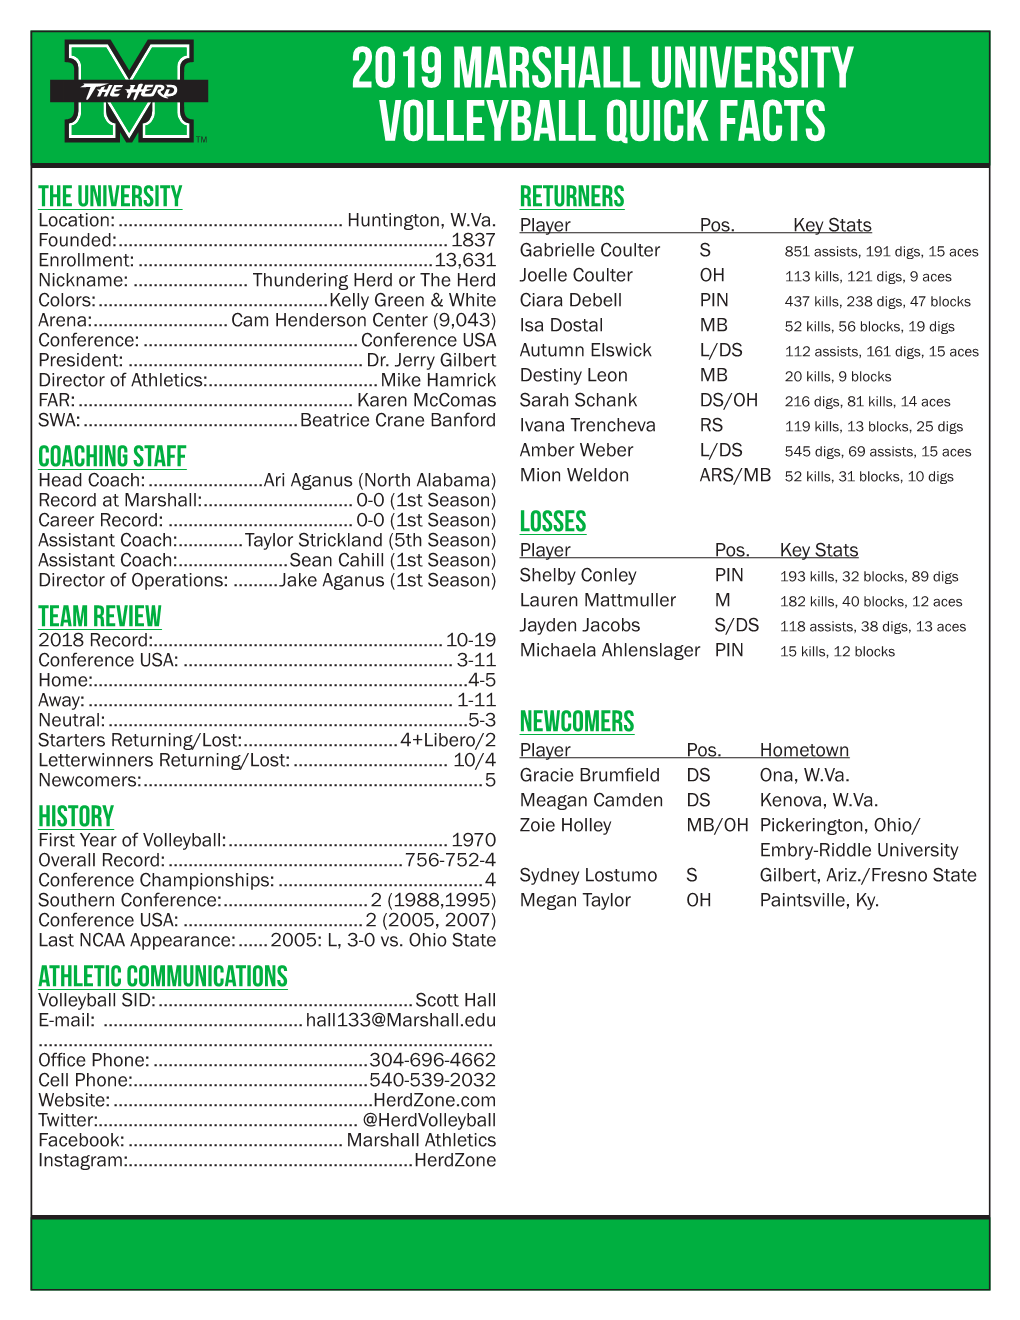 2019 Marshall University Volleyball Quick Facts